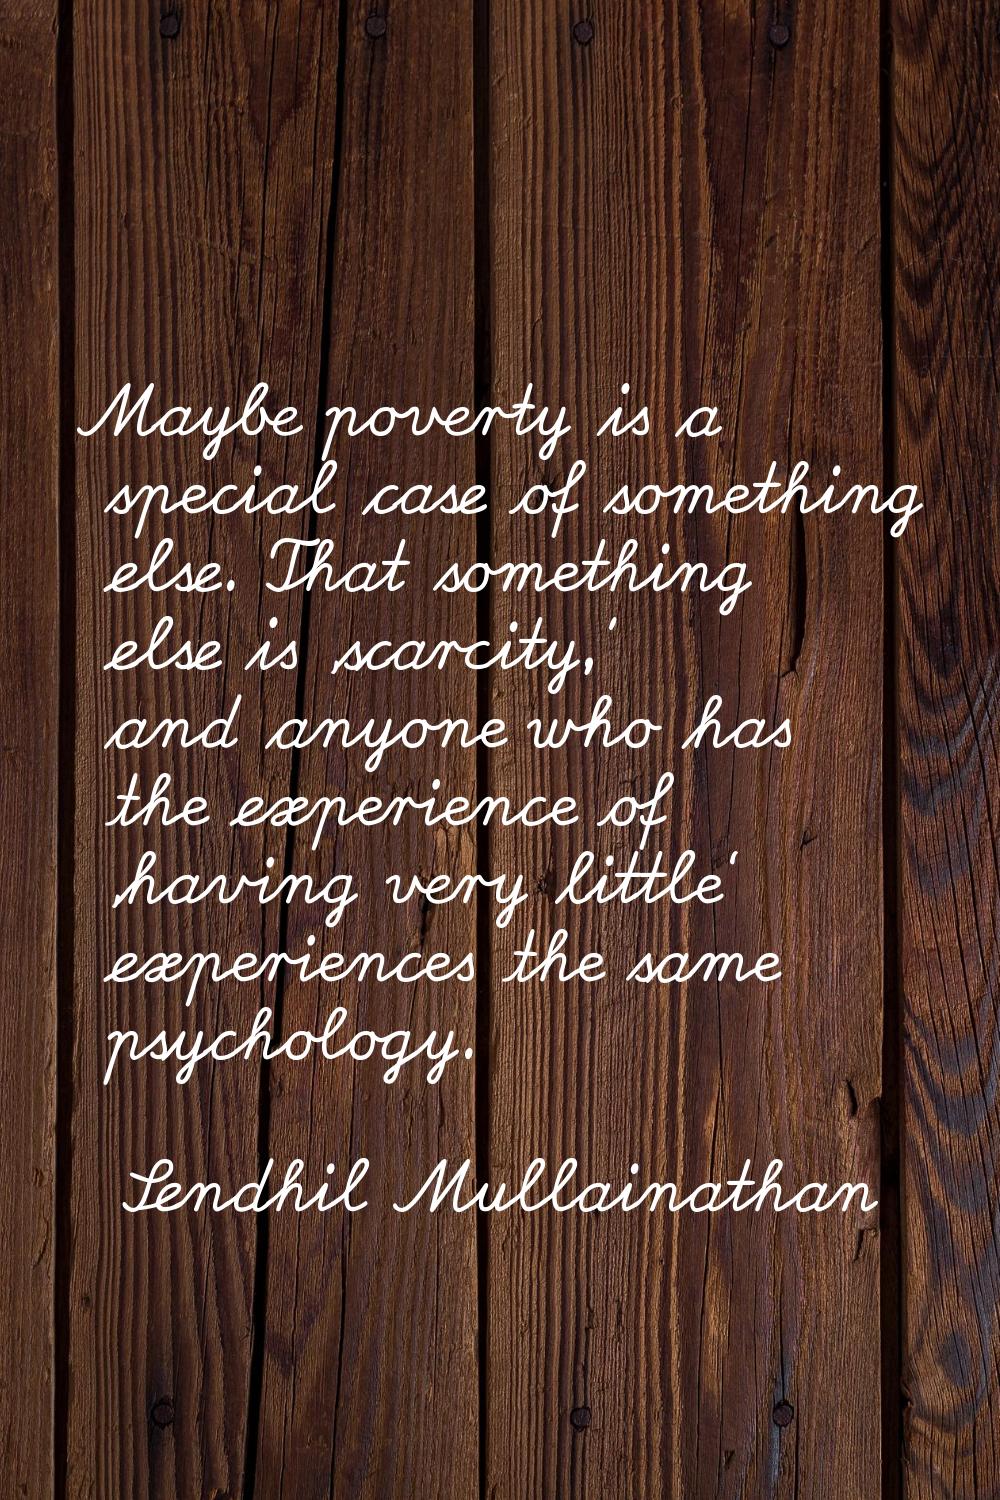 Maybe poverty is a special case of something else. That something else is 'scarcity,' and anyone wh